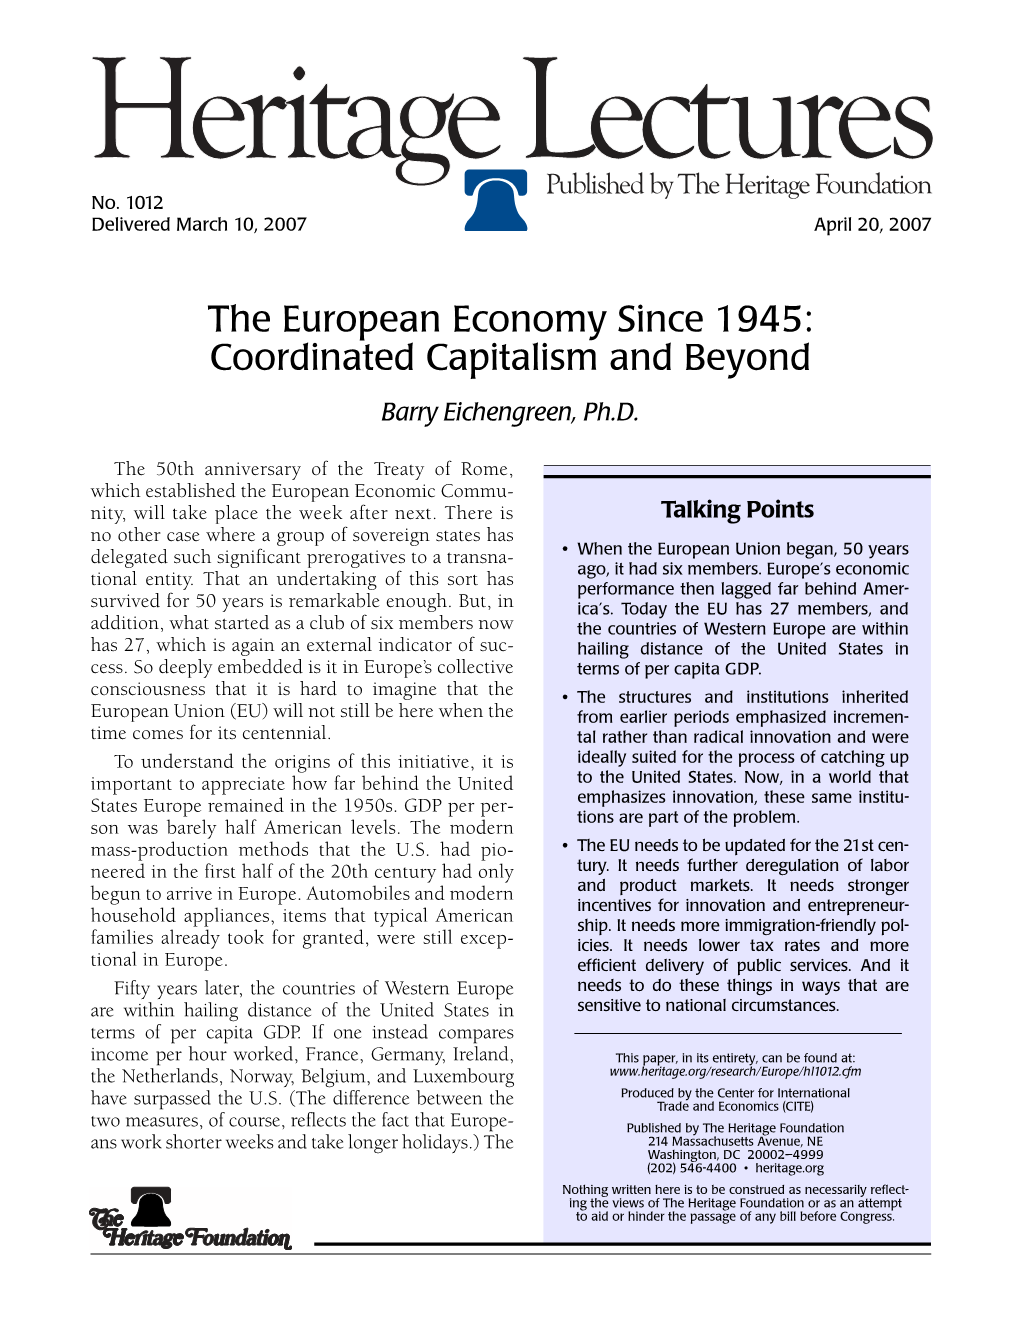 The European Economy Since 1945: Coordinated Capitalism and Beyond Barry Eichengreen, Ph.D